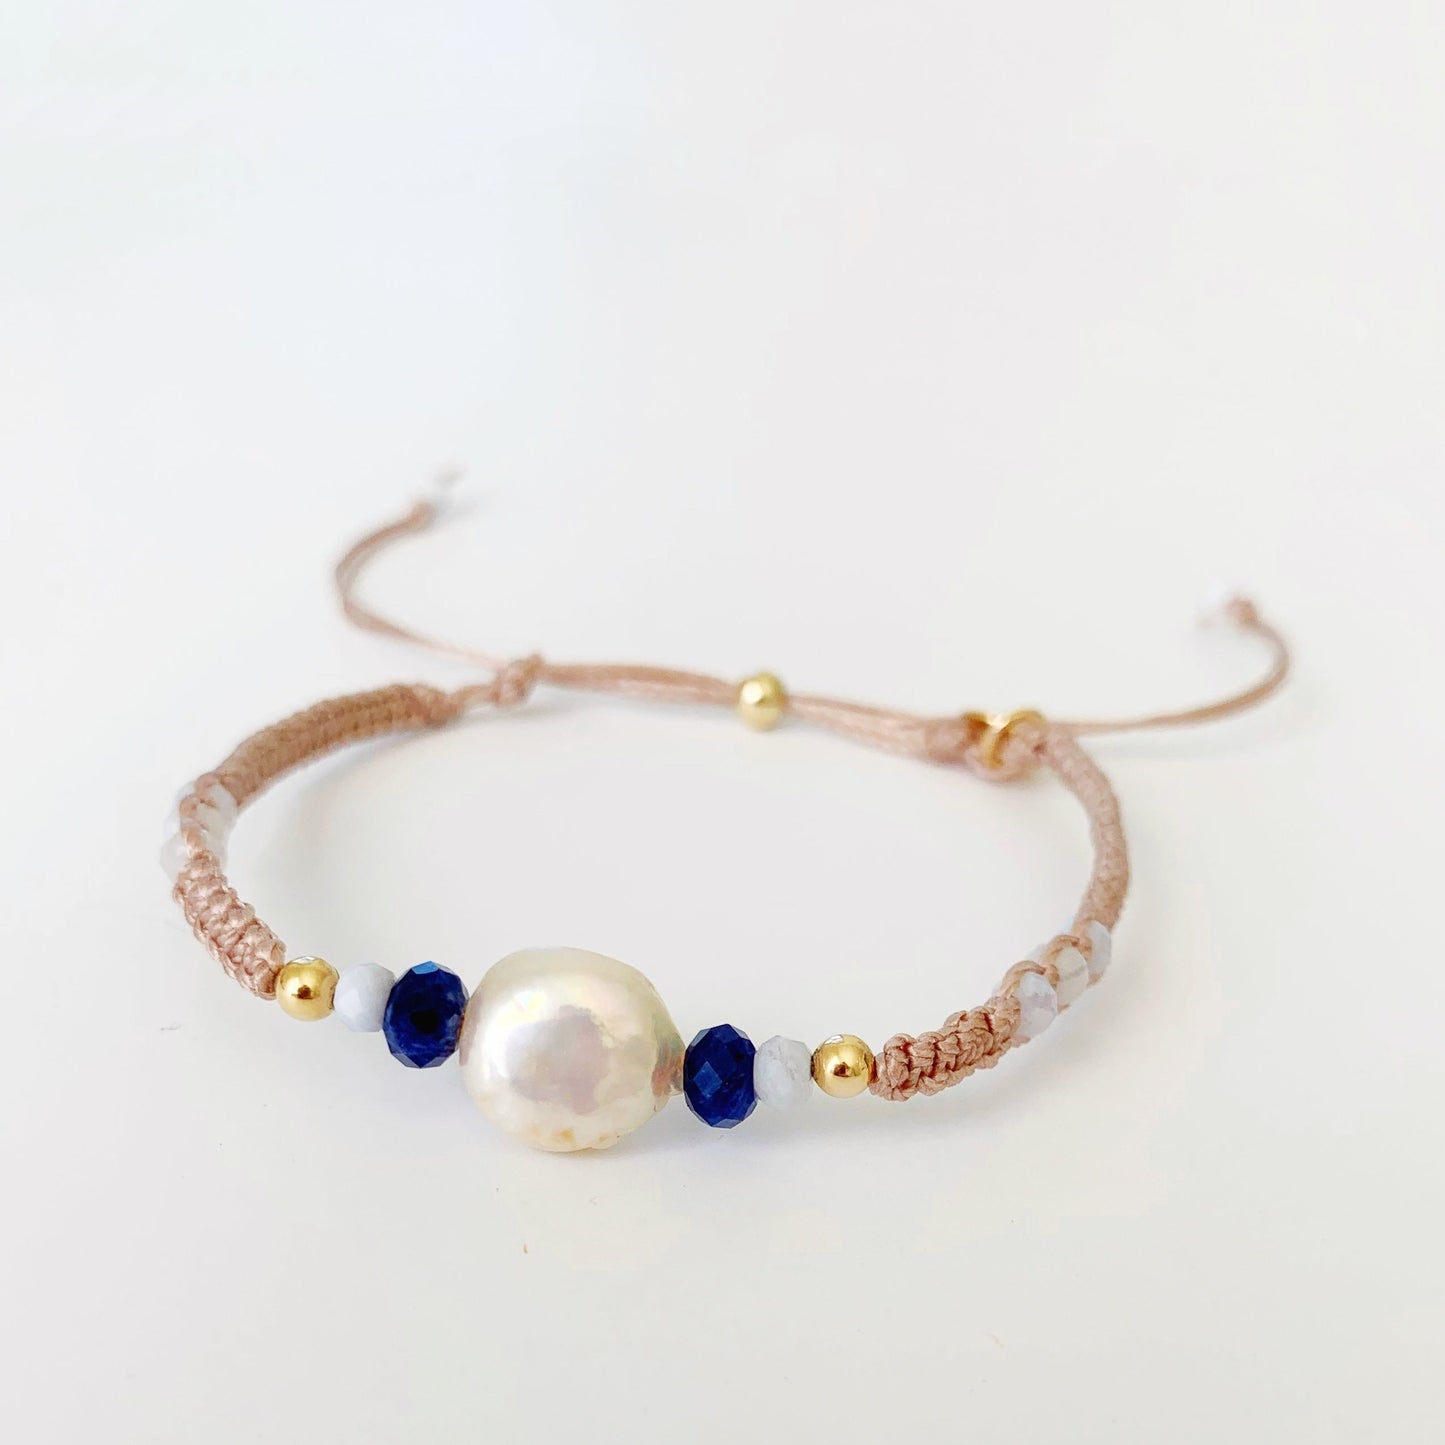 The bristol macrame bracelet in color iced coffee addict is a tan adjustable cord bracelet with freshwater coin pearl and semiprecious beads at the center and a 14k gold filled slide clasp in the back. this bracelet is photographed on a white surface